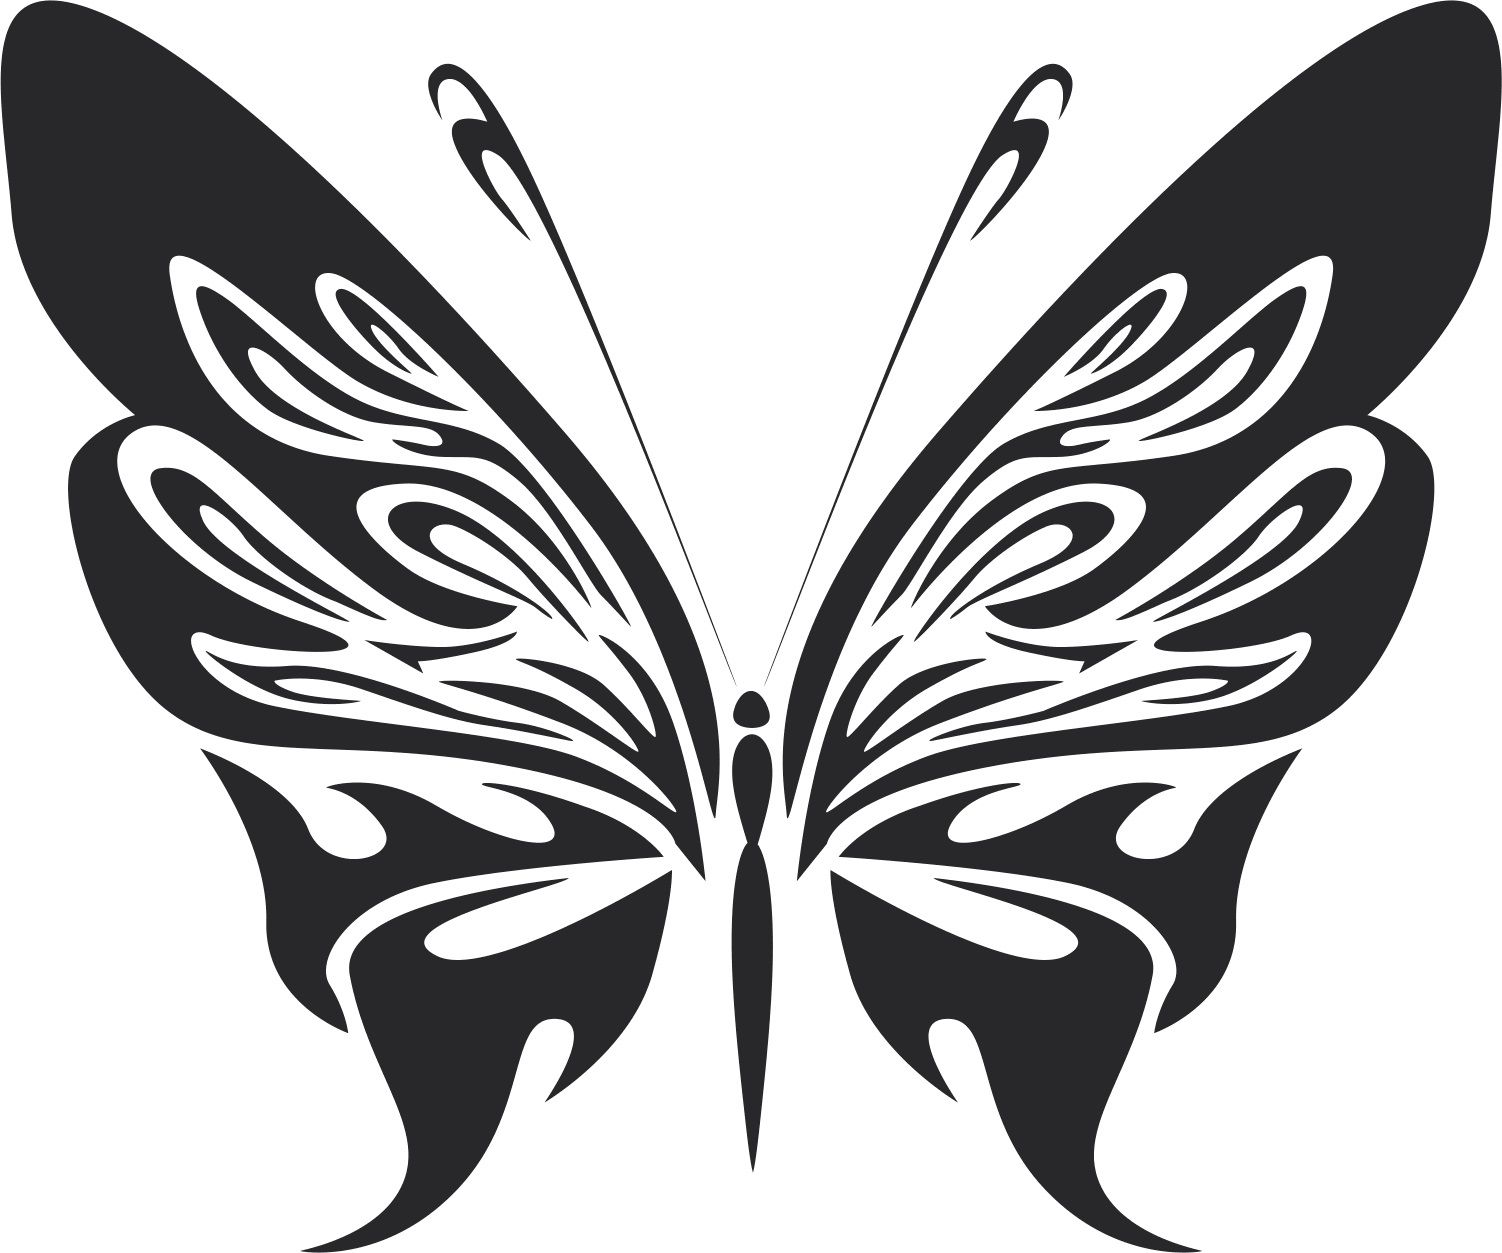 Tattoo Tribal Butterfly 255 Free DXF File